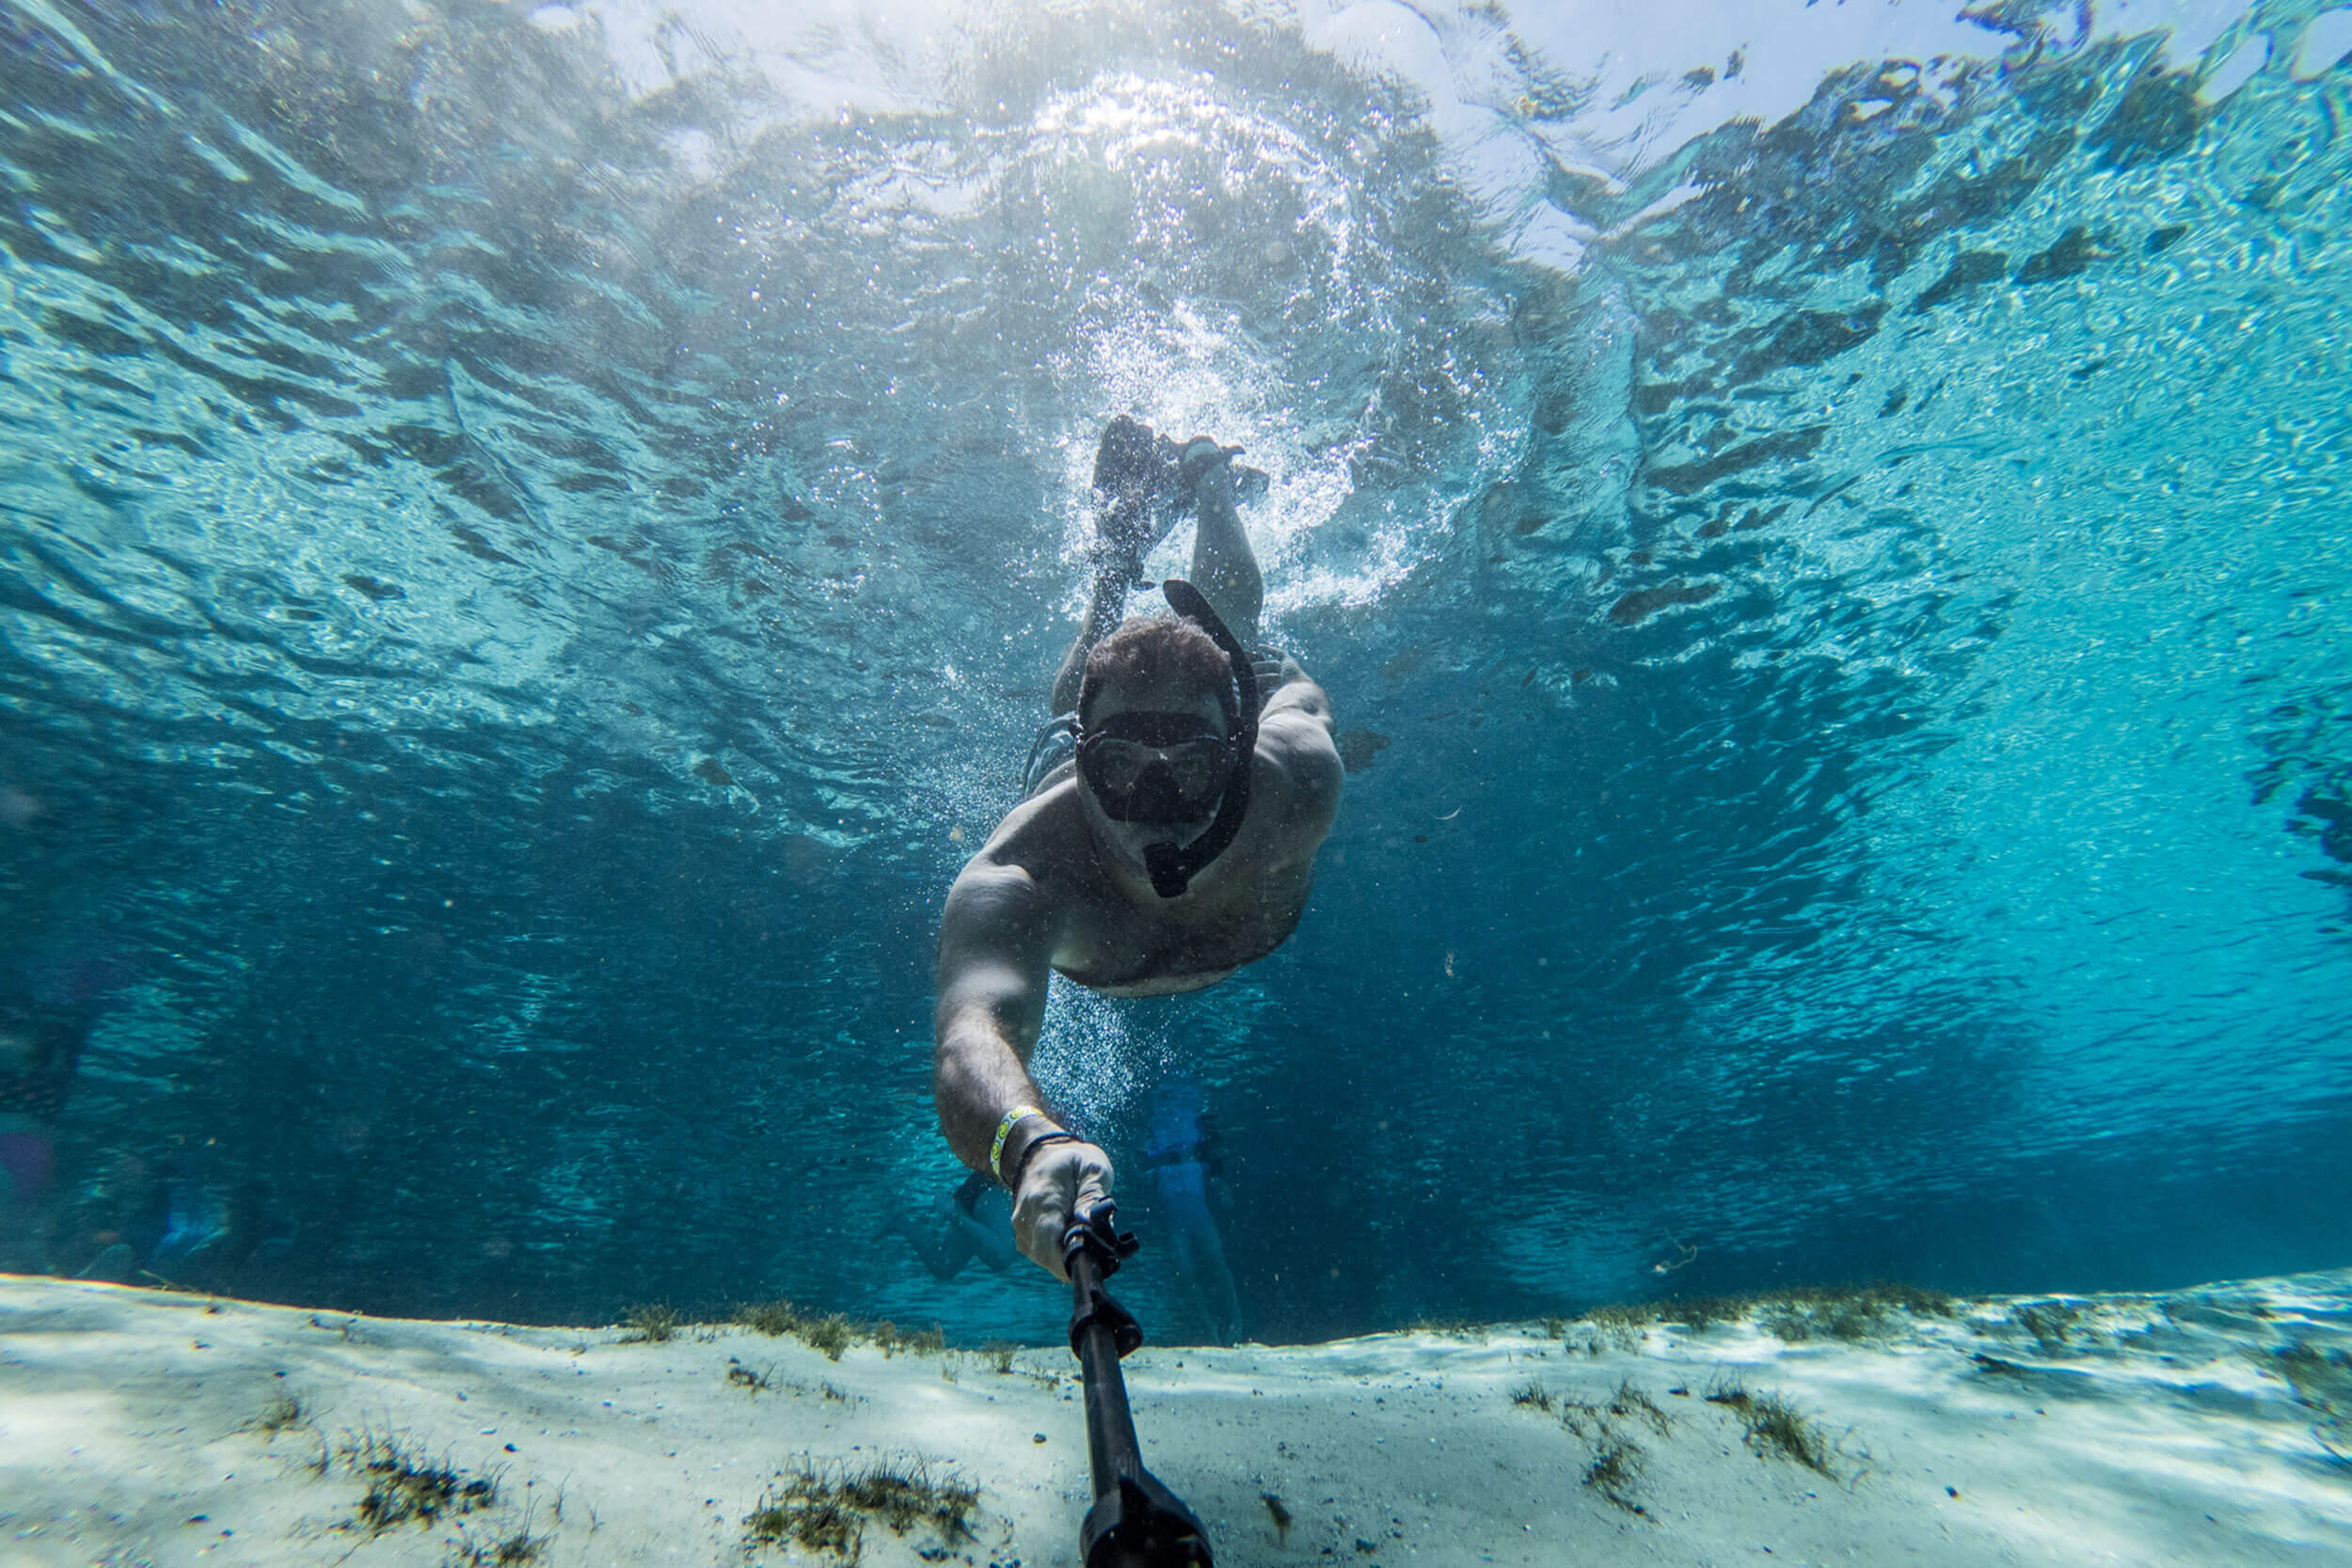 Man takes selfies under crystal clear waters of the Silver Glen Park in Florida.